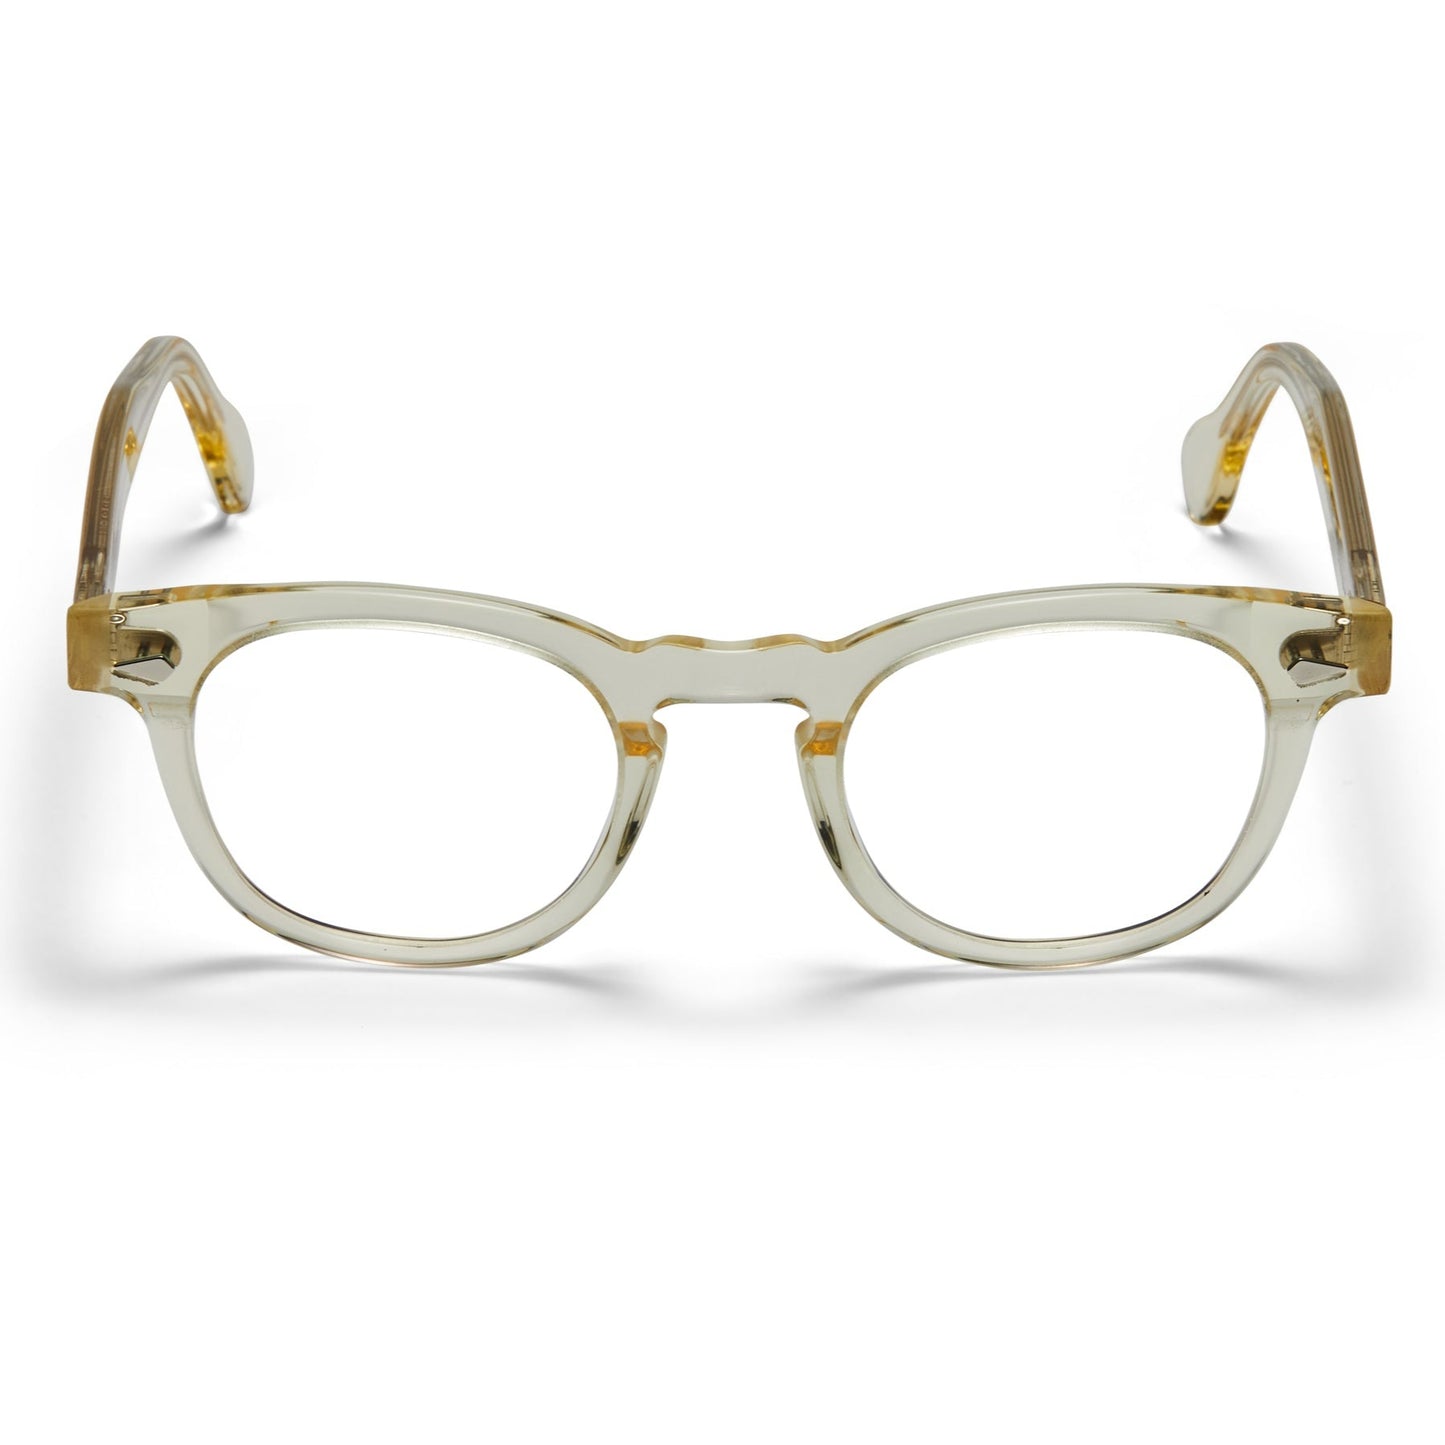 A front view of the champaign Arnel USA frame—the Vintage eyewear. 